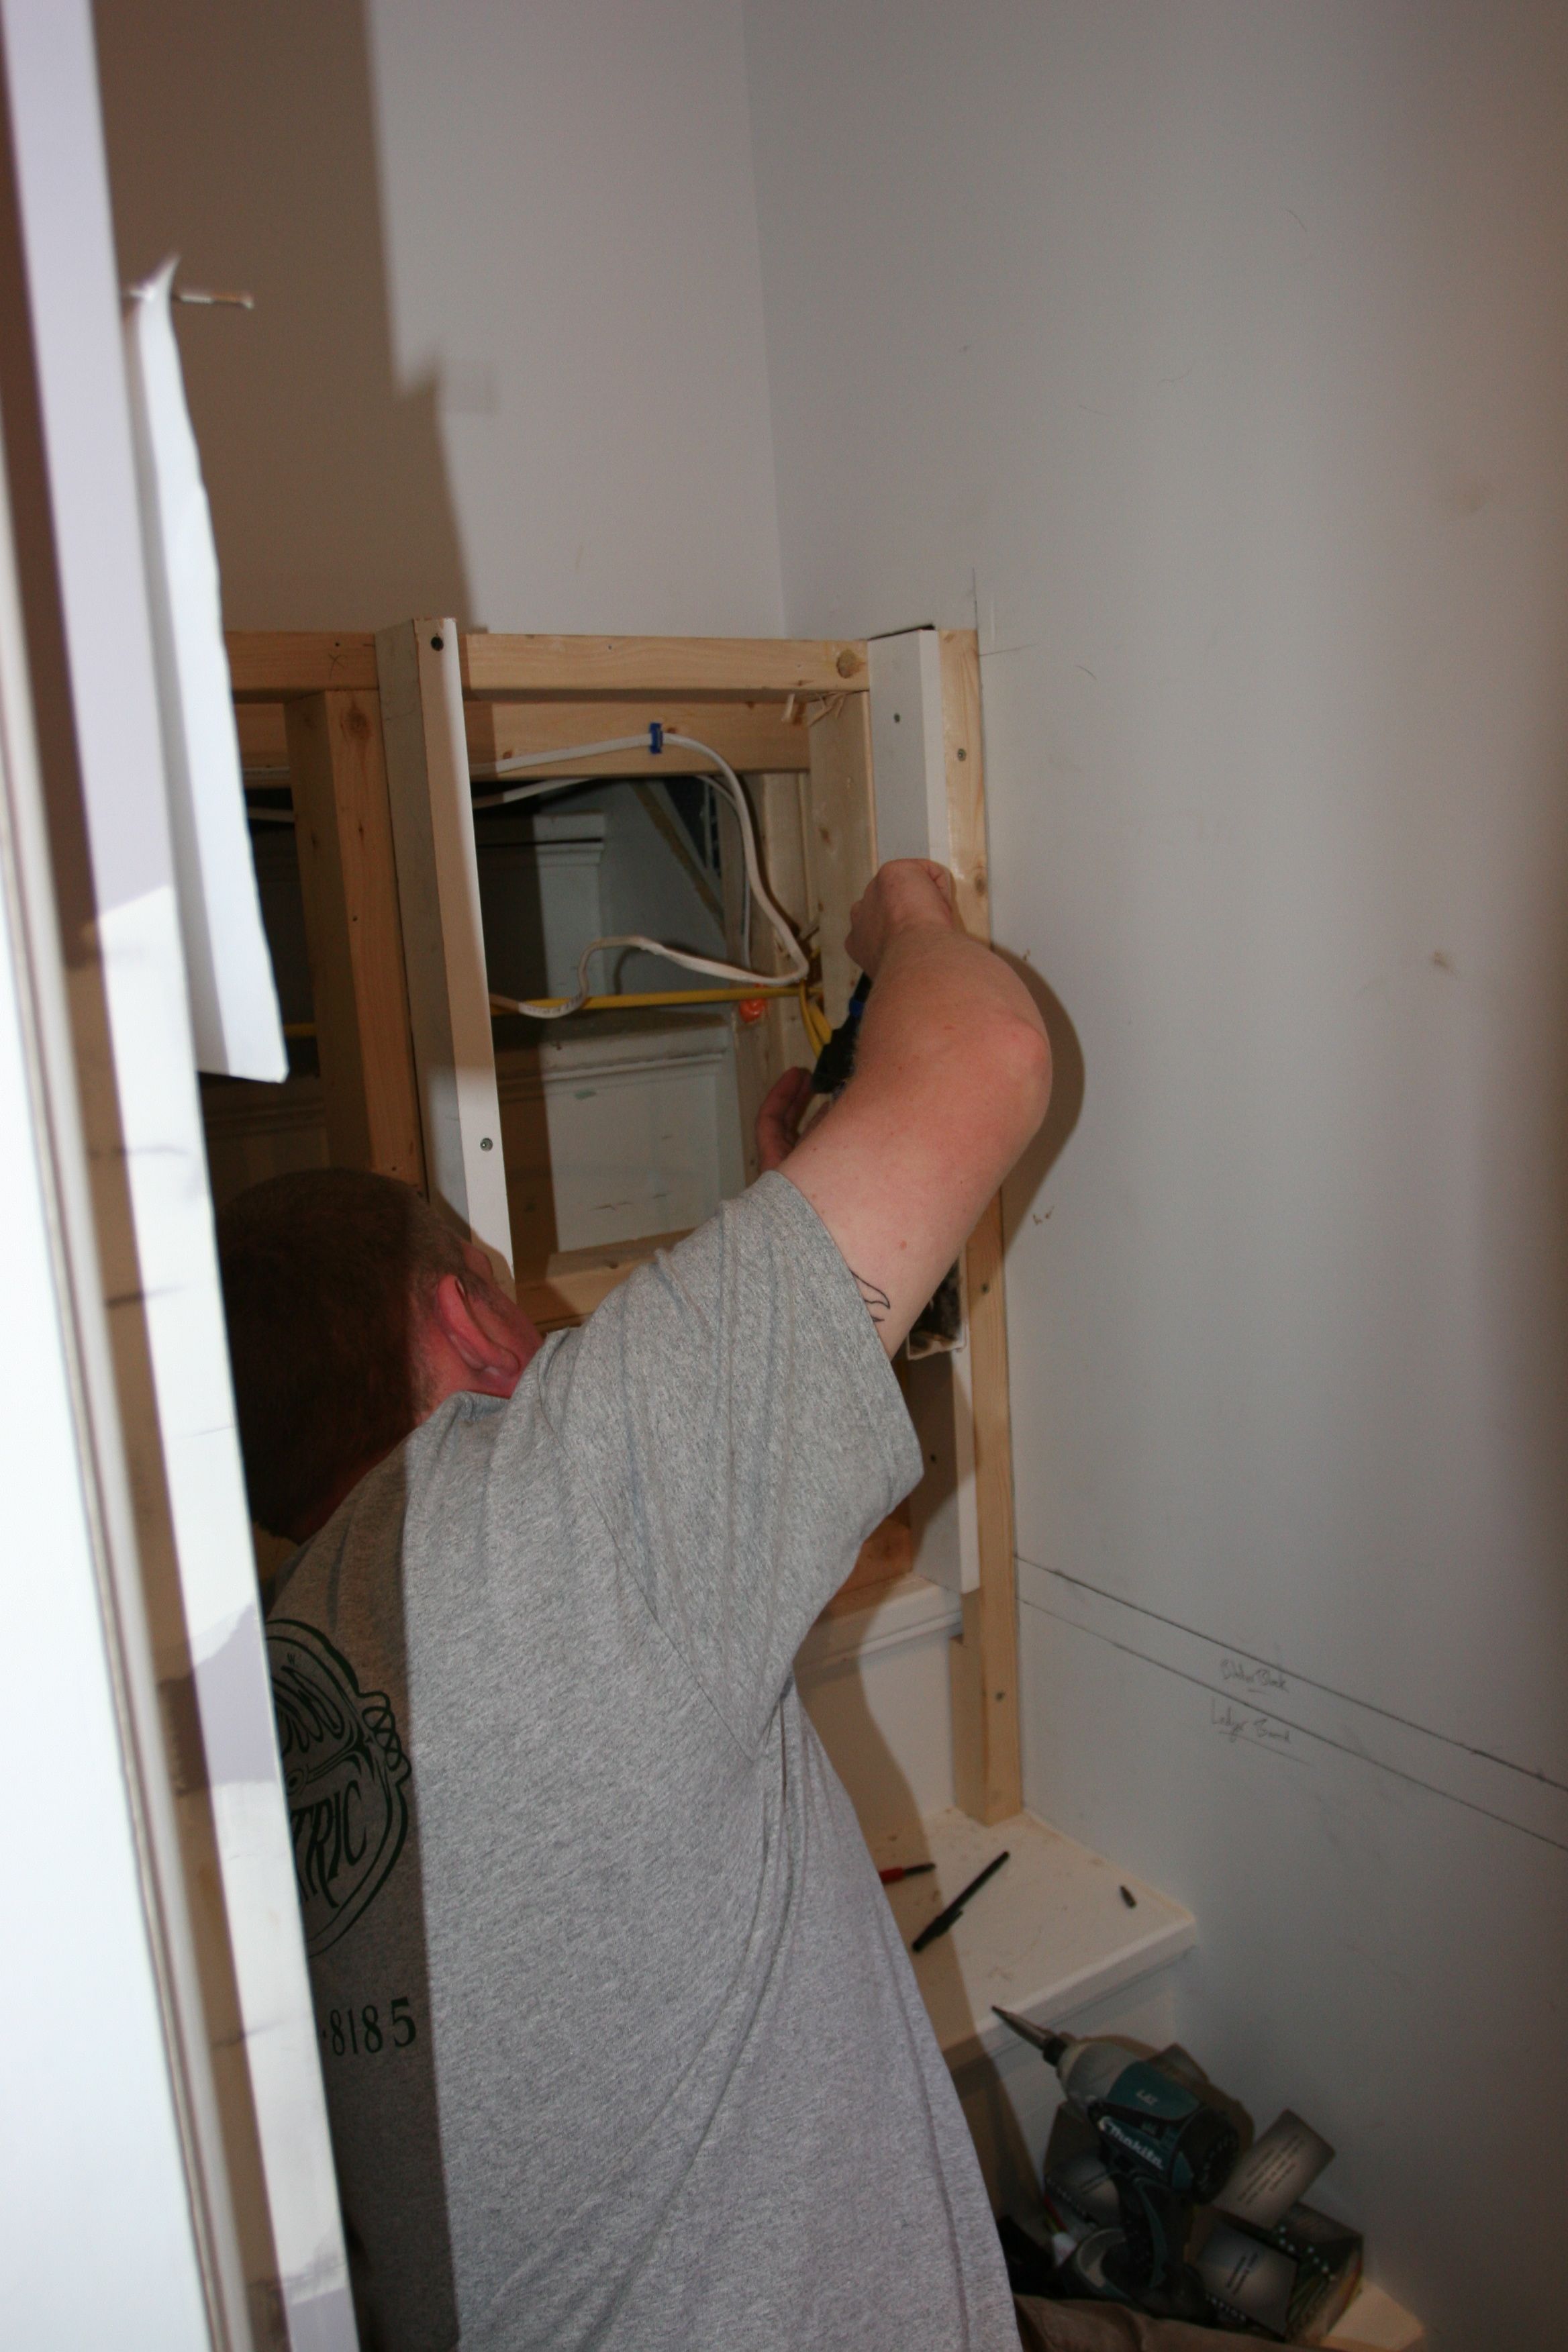 Brad inching the outlets and wires forward to the correct position.